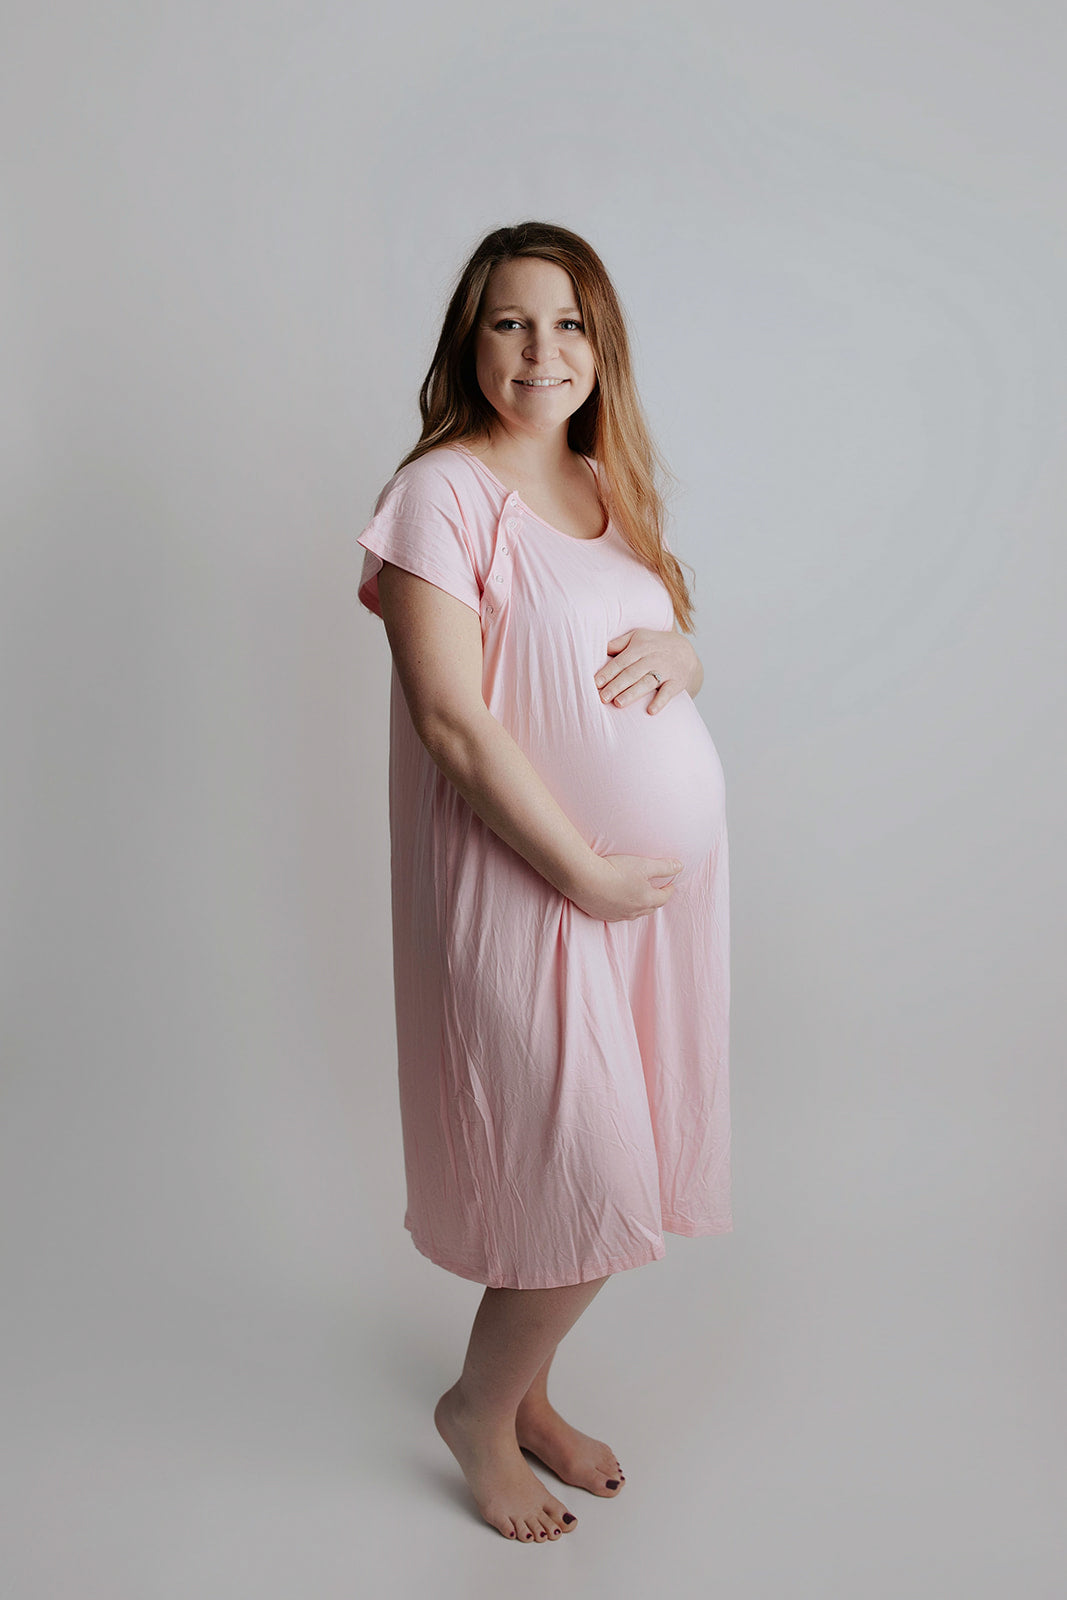 Light Pink Labor & Delivery Gown